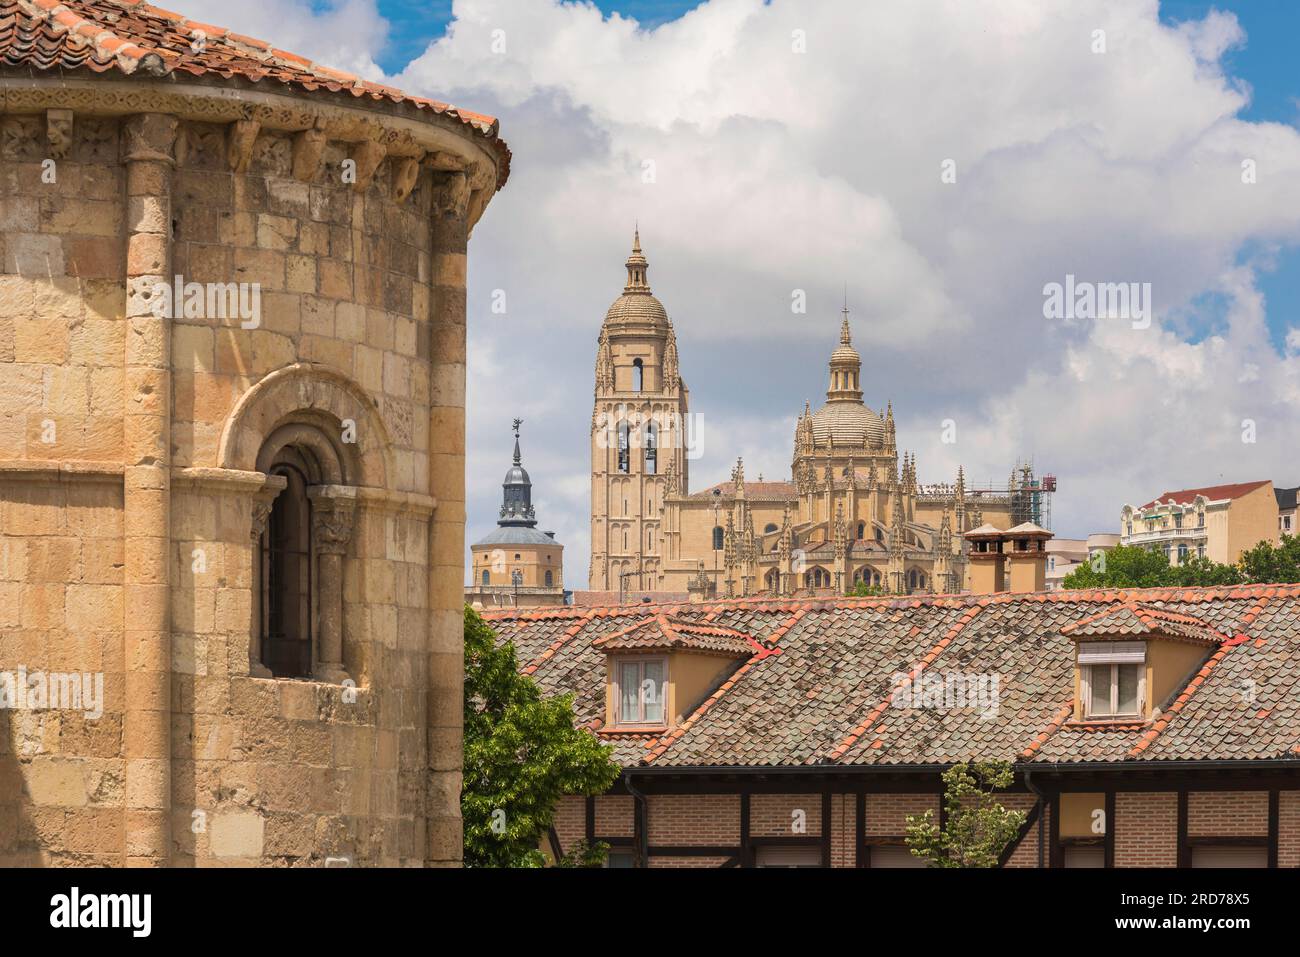 Old Spanish city skyline, view of the Baroque Cathedral in Segovia showing the romanesque apse of the Iglesia de San Millan in the foreground, Spain. Stock Photo